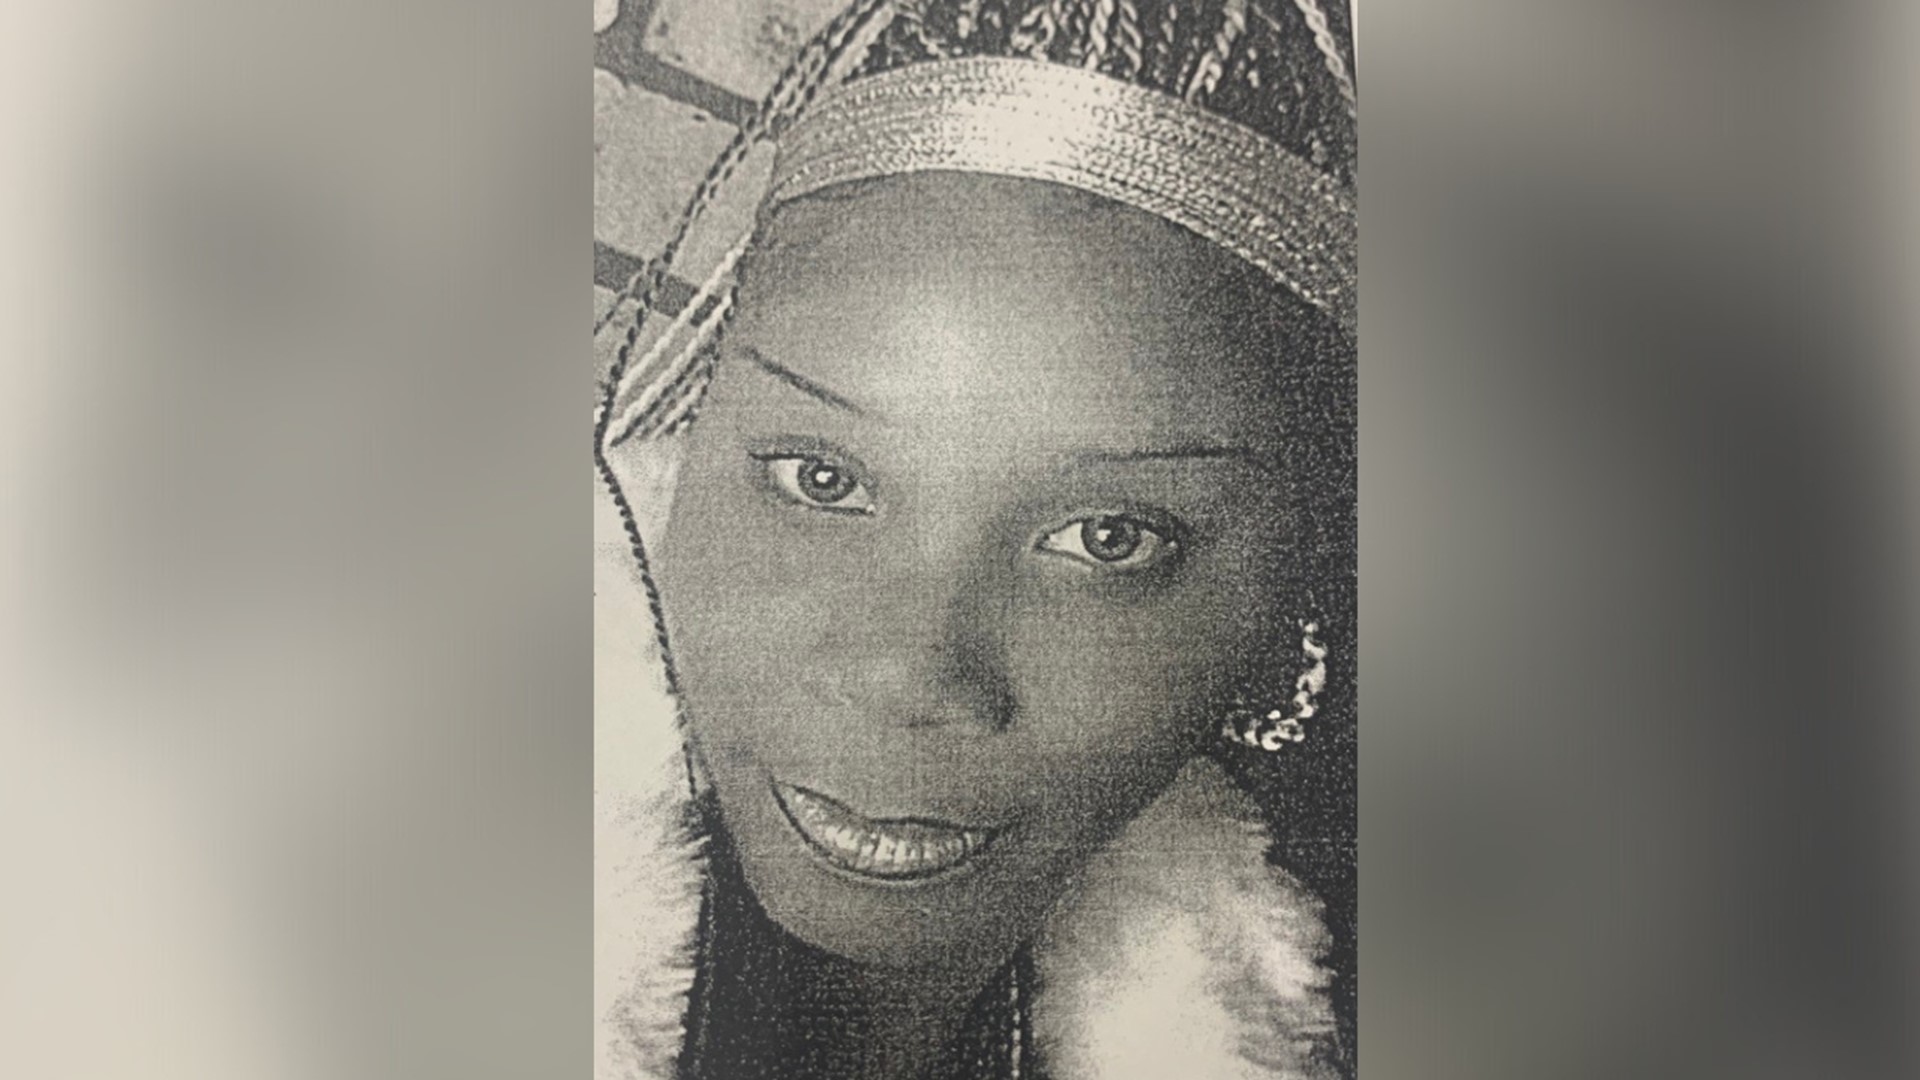 Patrenia Turner, 40, was a mother of three and a former housekeeper, her mother Ruth told 5 On Your Side.